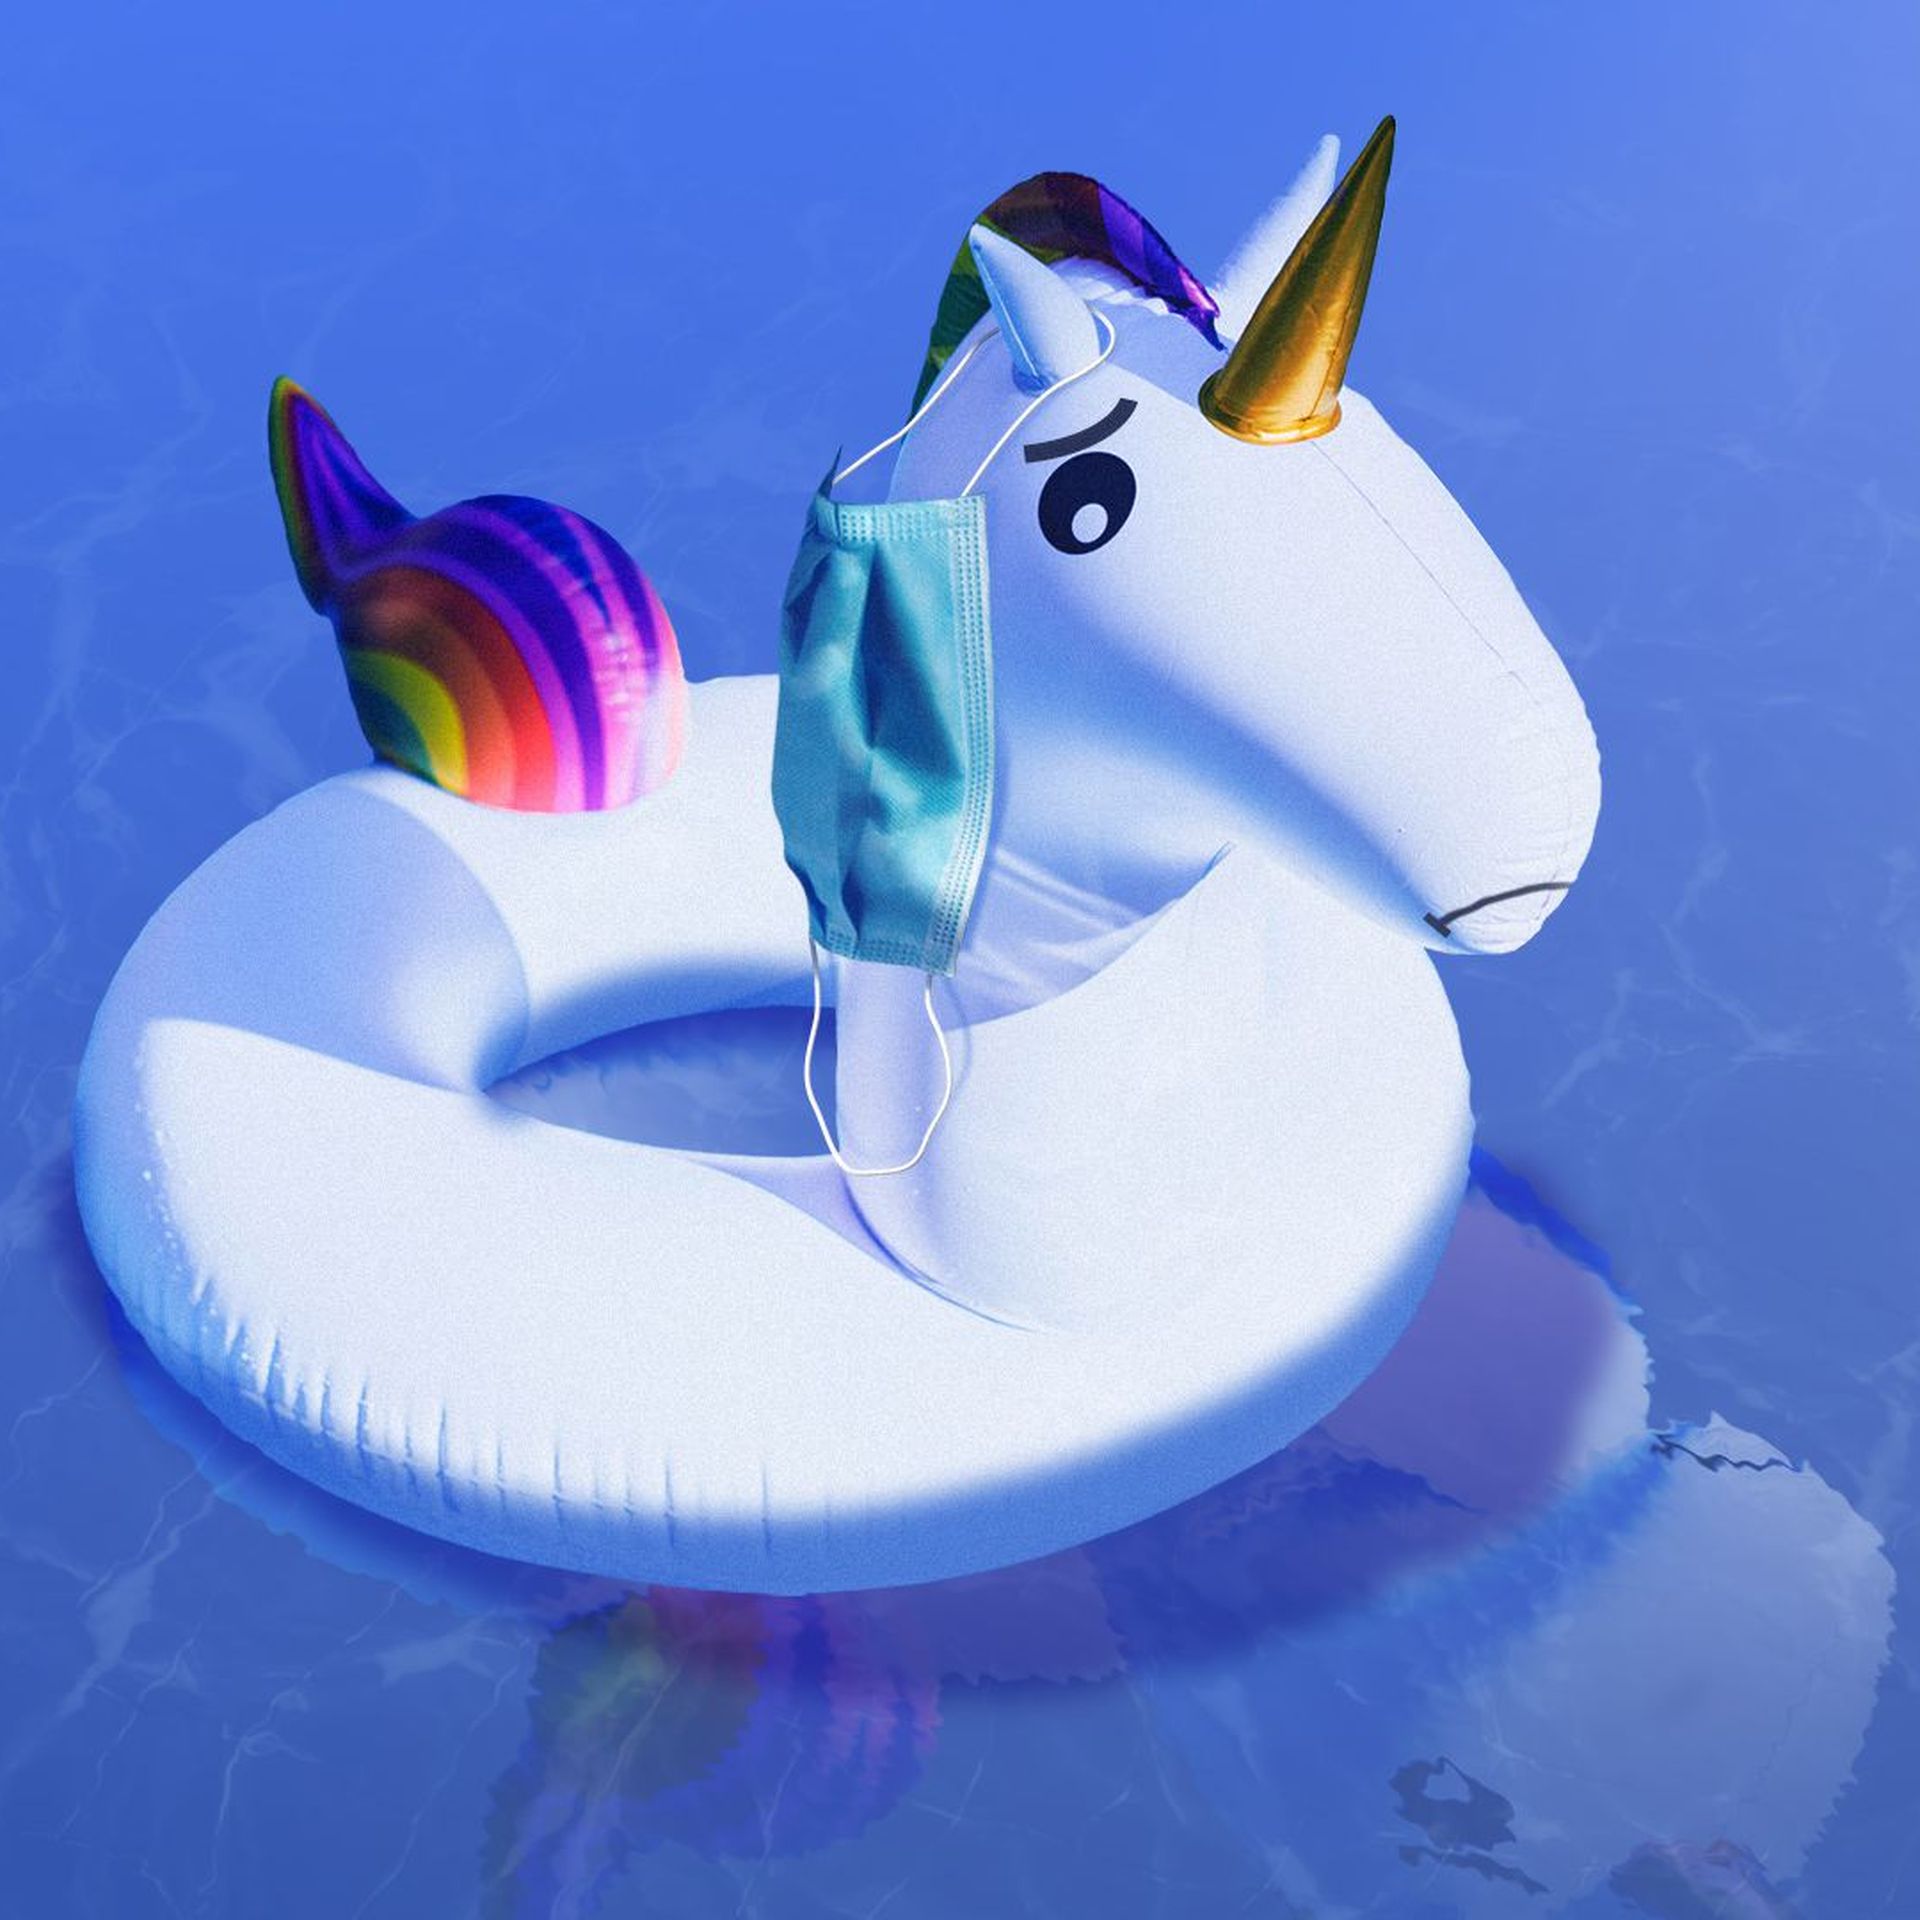 Illustration of a sad-looking inflatable unicorn pool tool with a mask